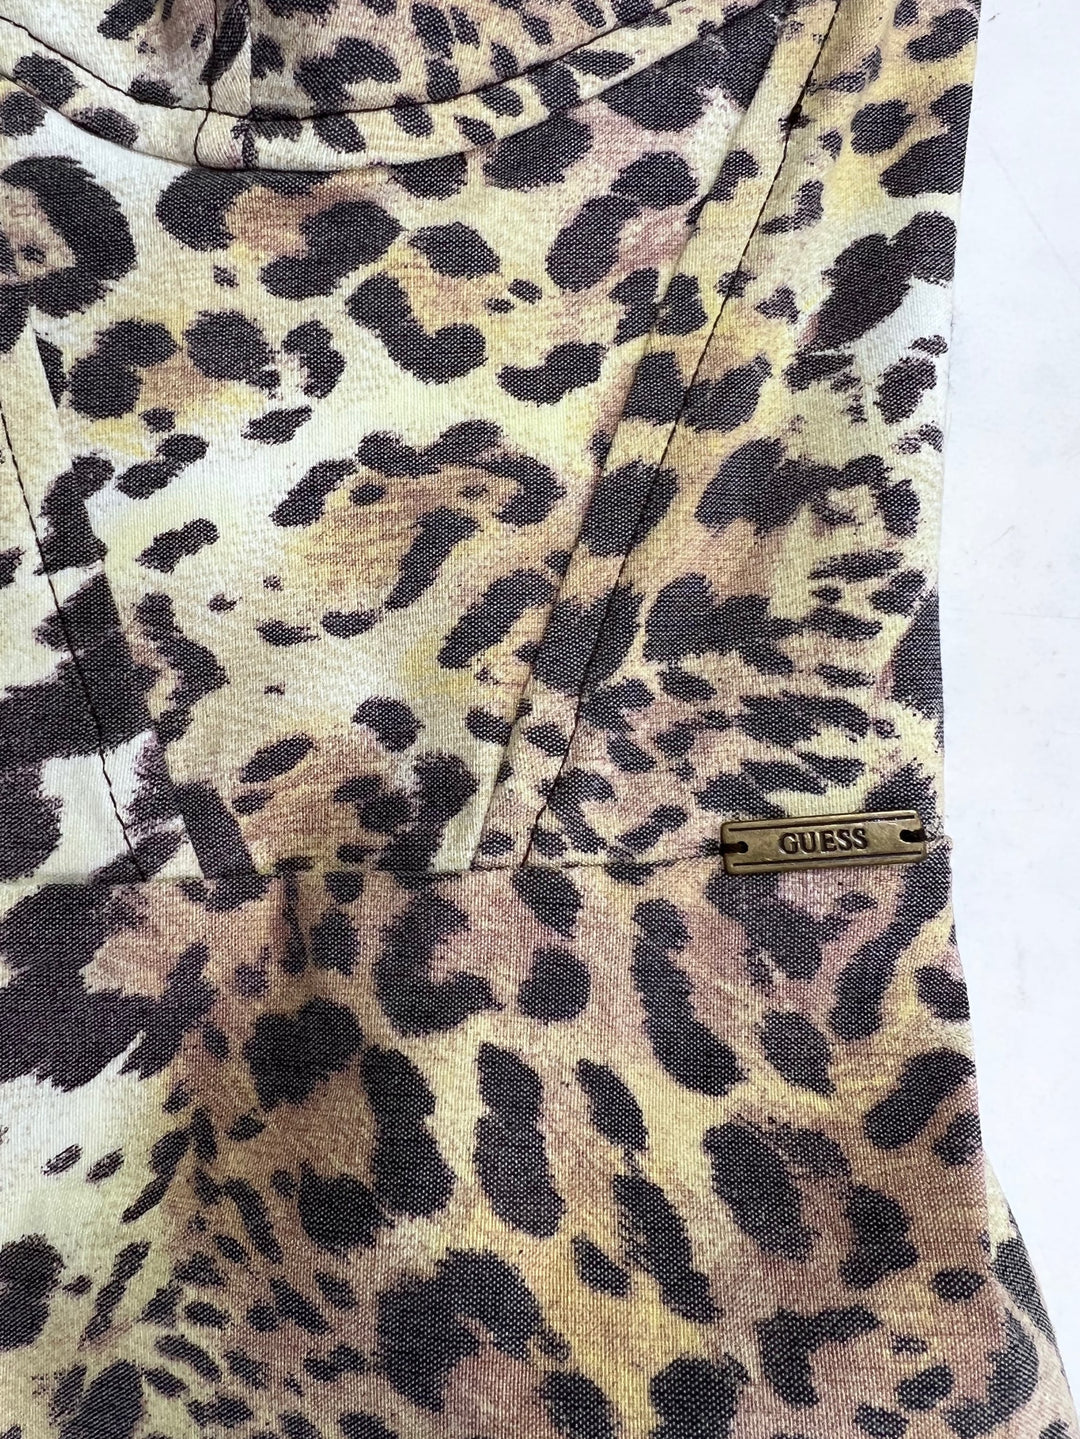 Vintage GUESS Leopard Dress Extra Small